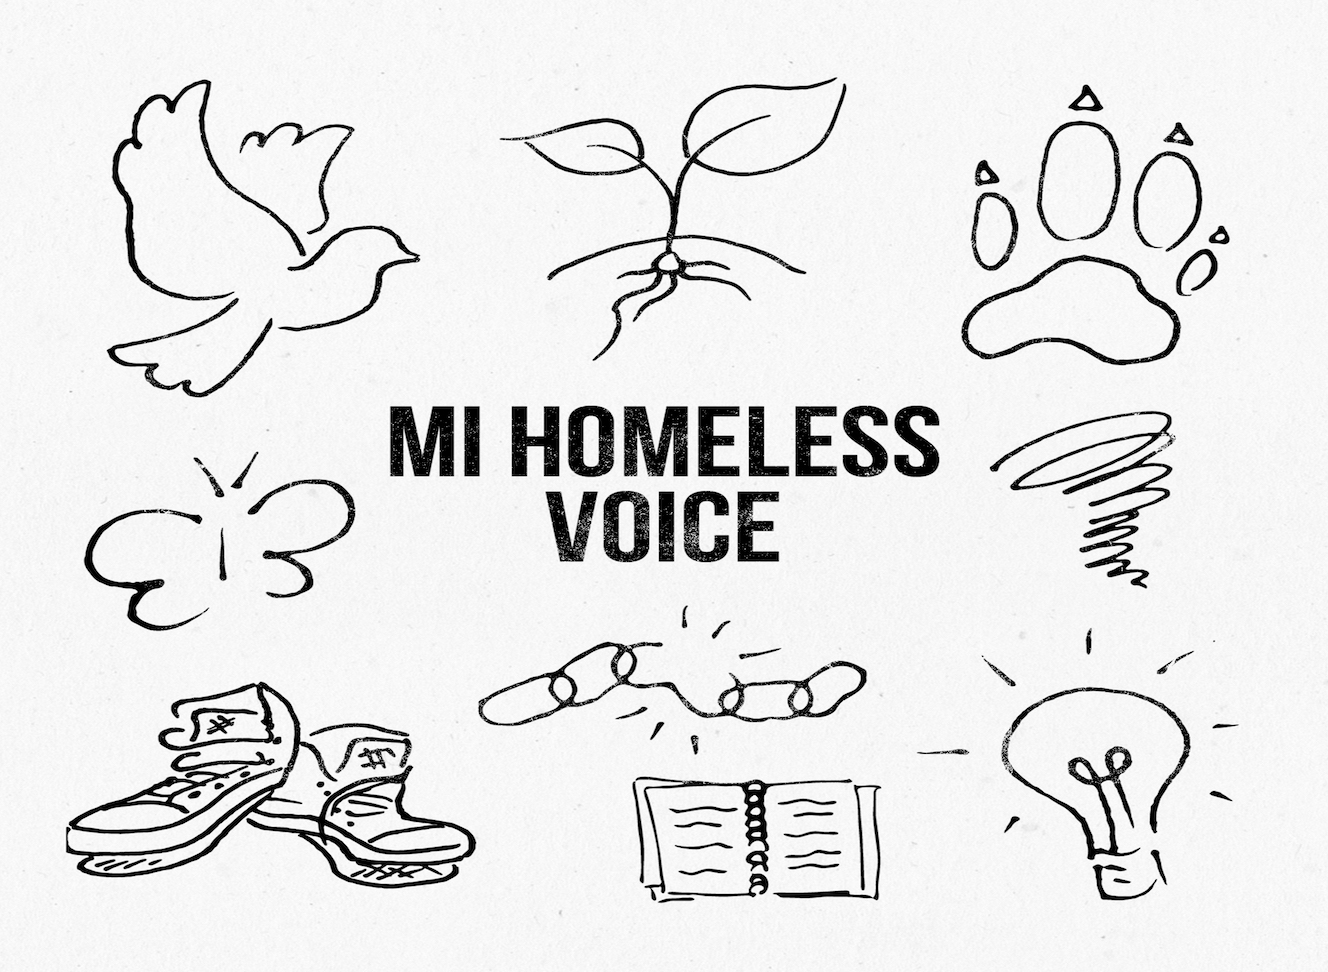 Album cover with white background and eight illustrations surrounding the words "MI Homeless Voice"